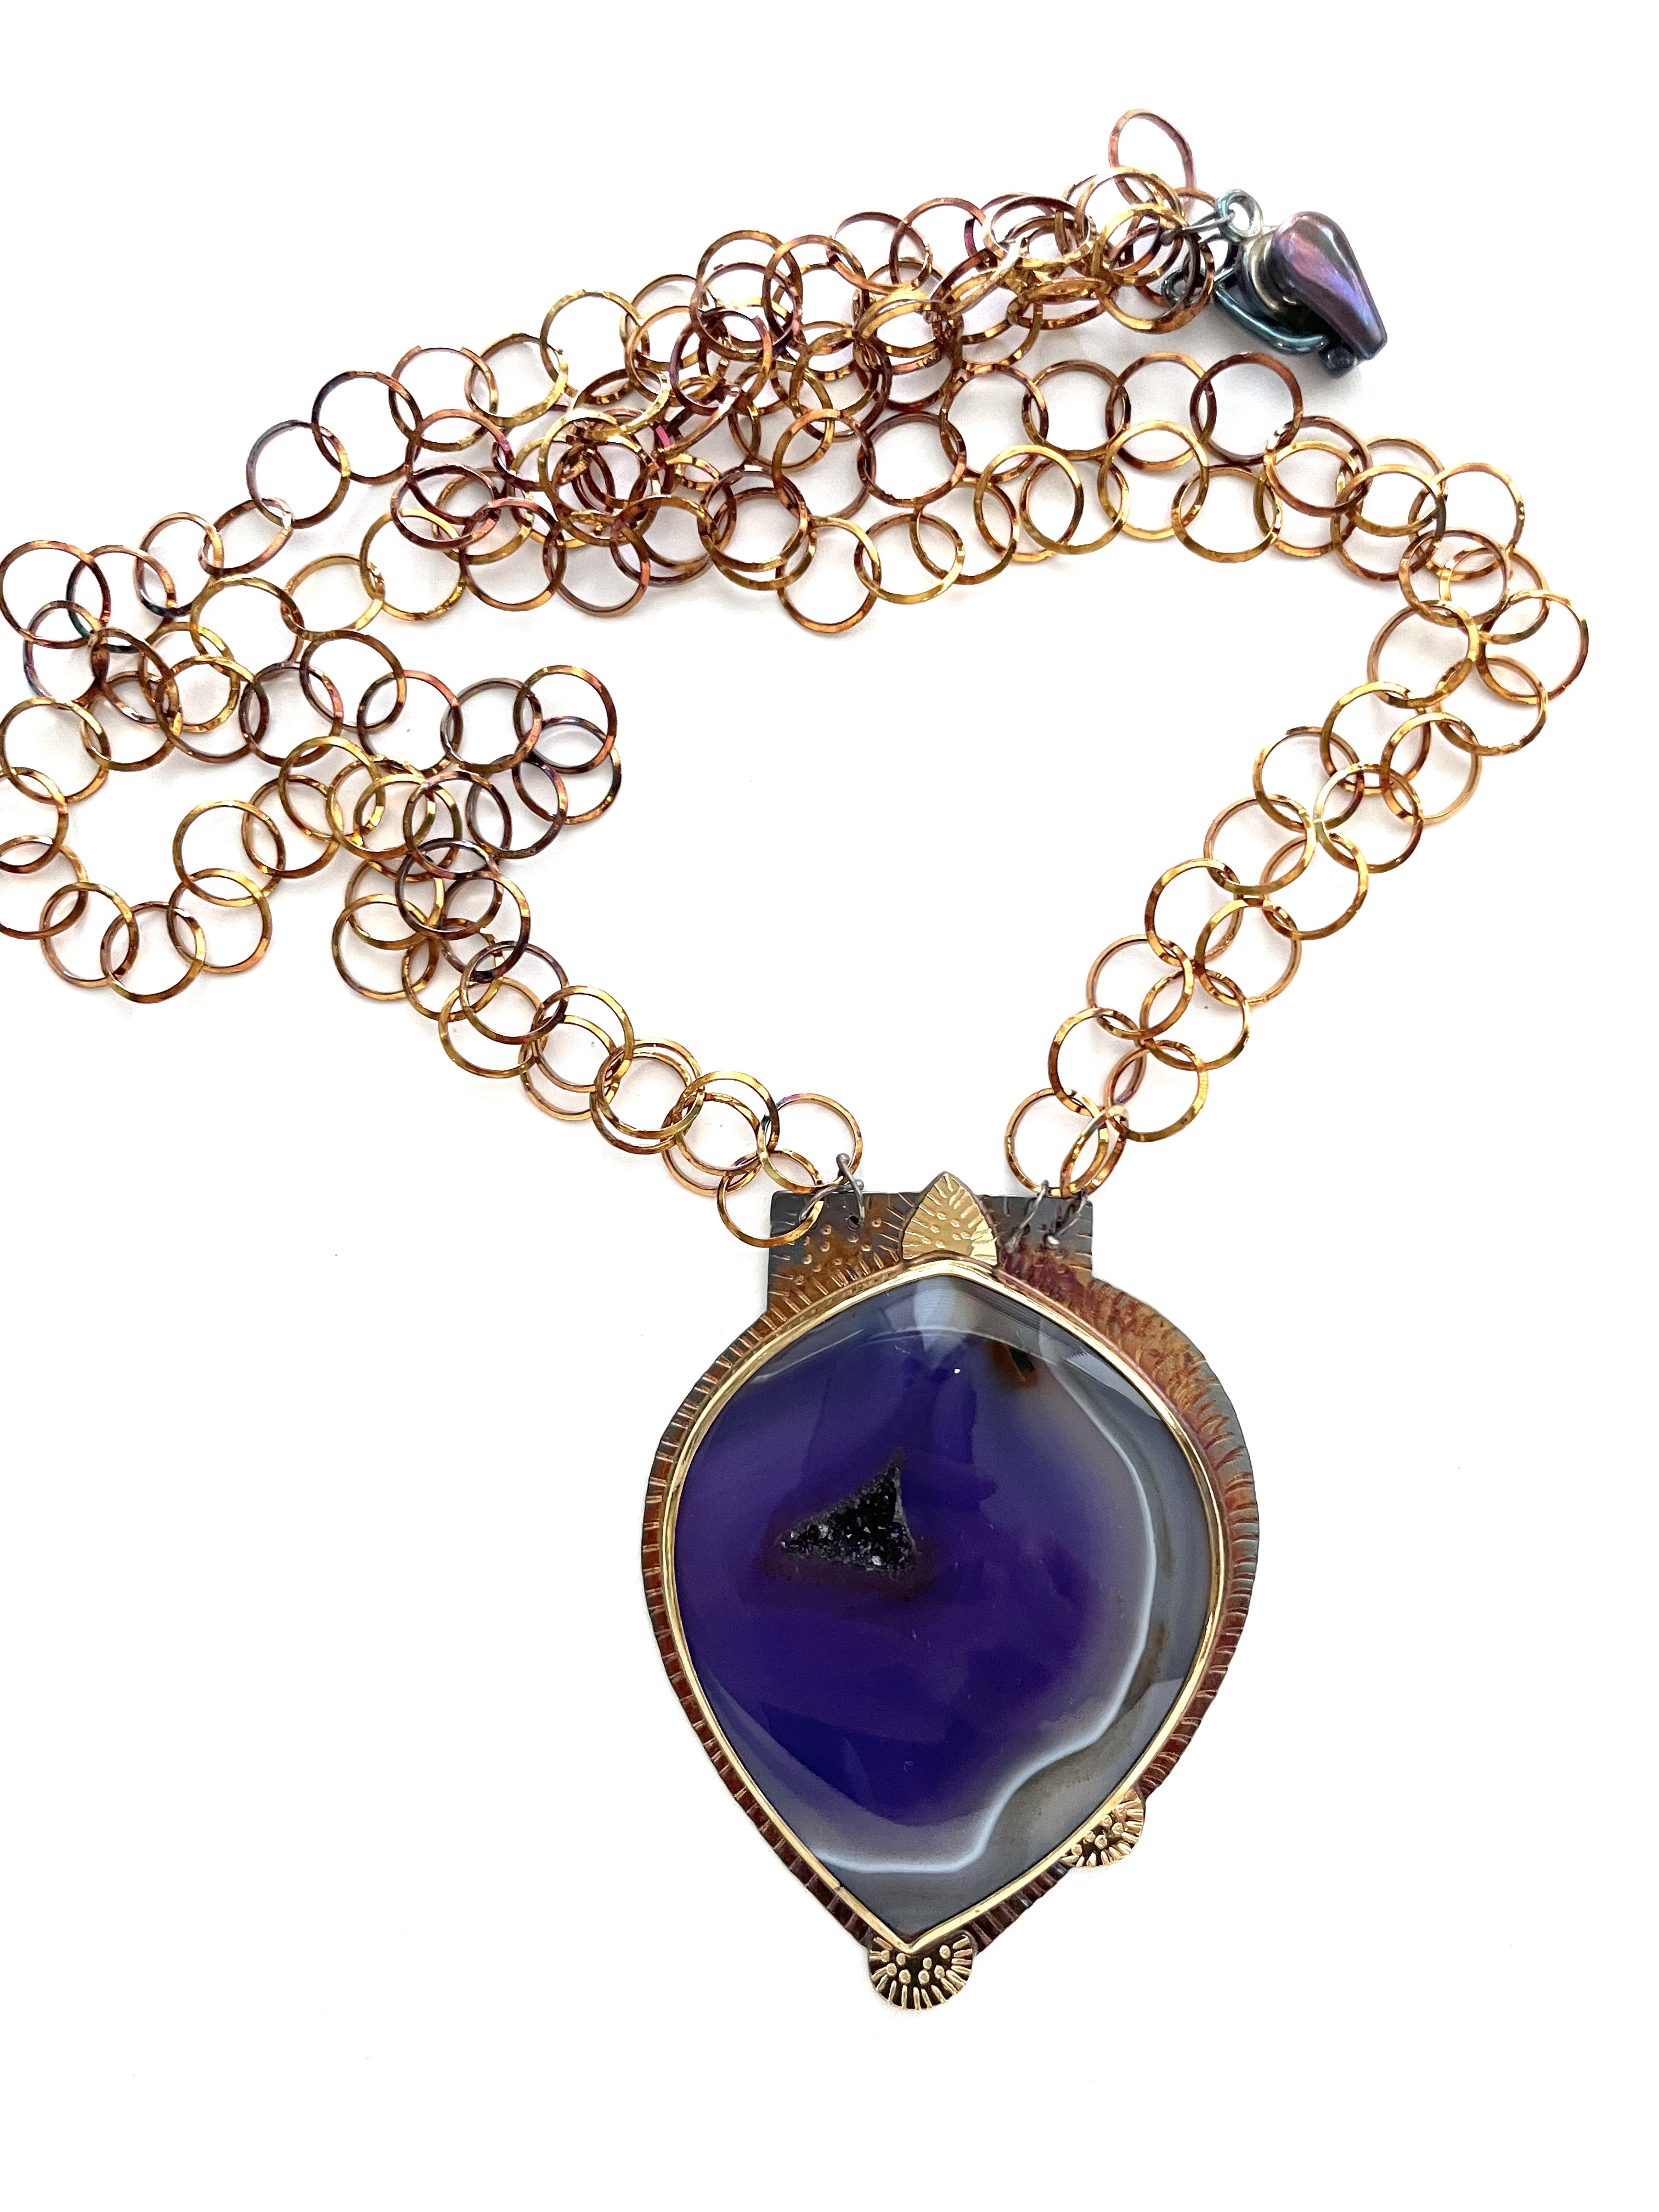 Sterling Silver, 18k Gold, Dyed Brazilian Agate with Druzy Inside, 24” long with Magnetic Clasp